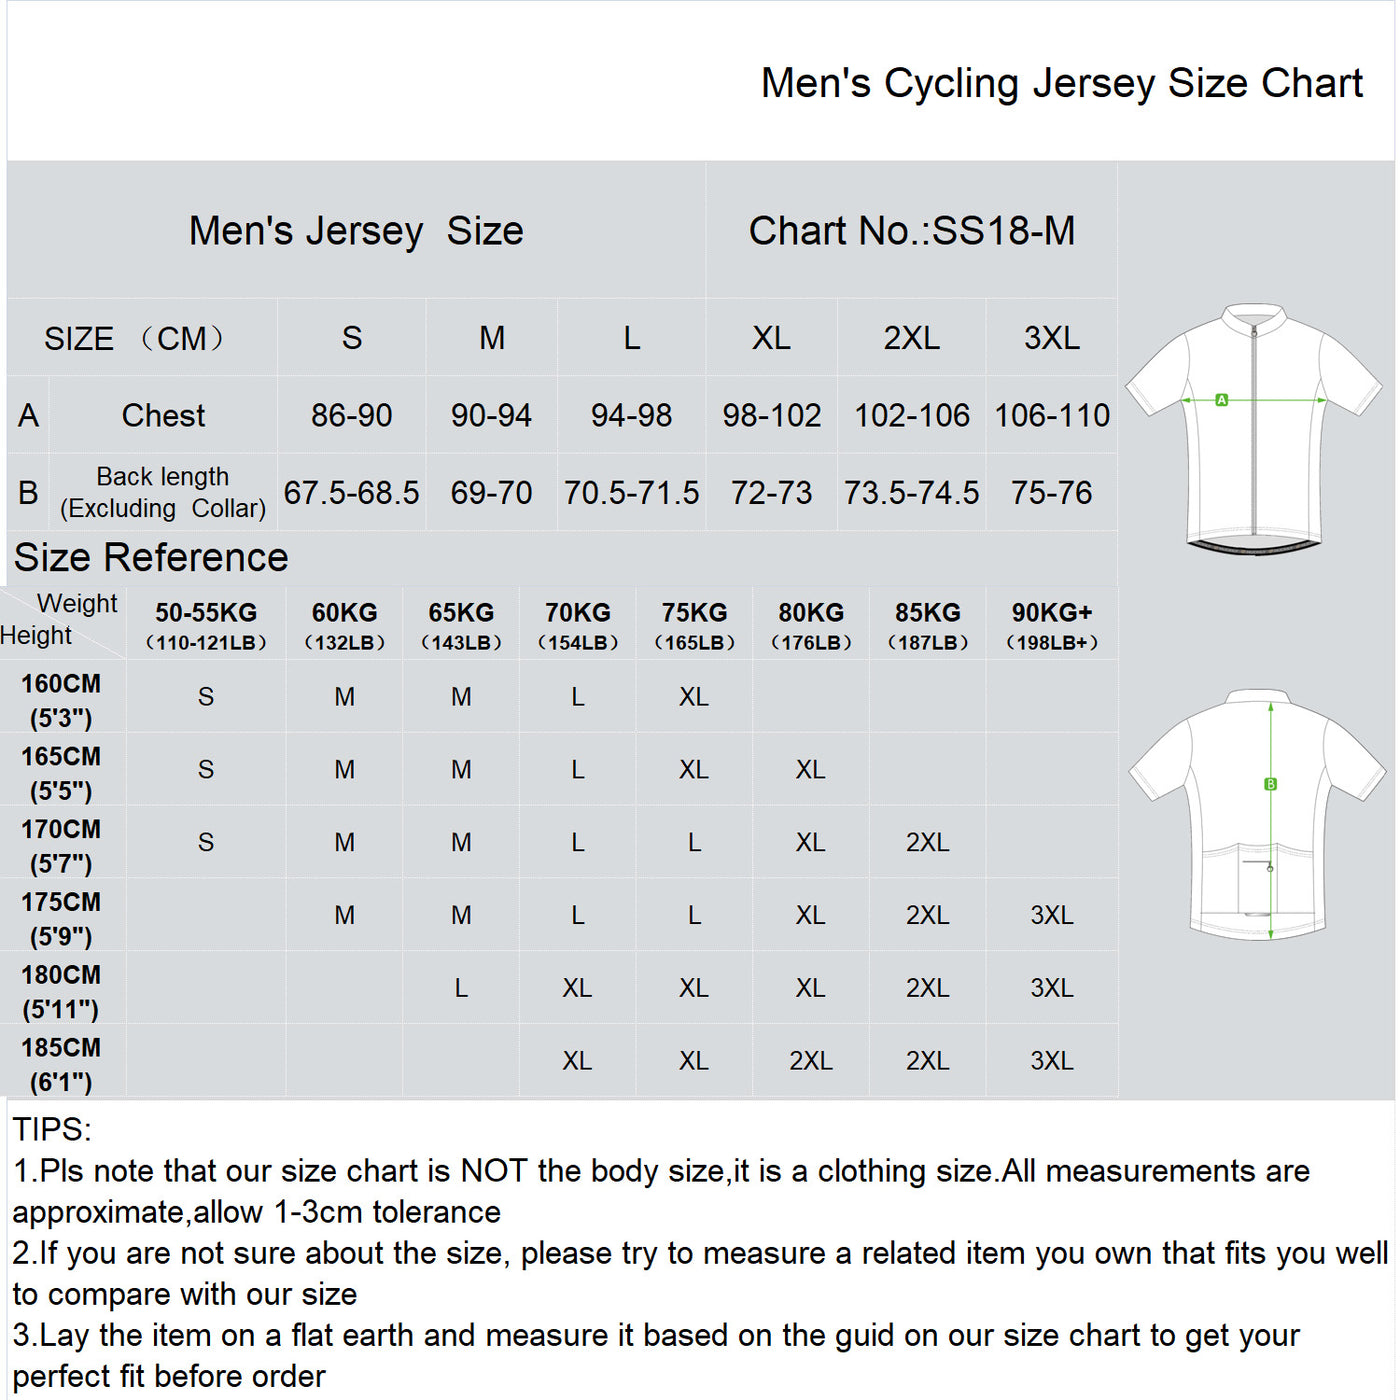 Nuckily Mycycology MH018SS-NS355 Half Sleeves Jersey and Gel Padded Shorts - Cyclop.in